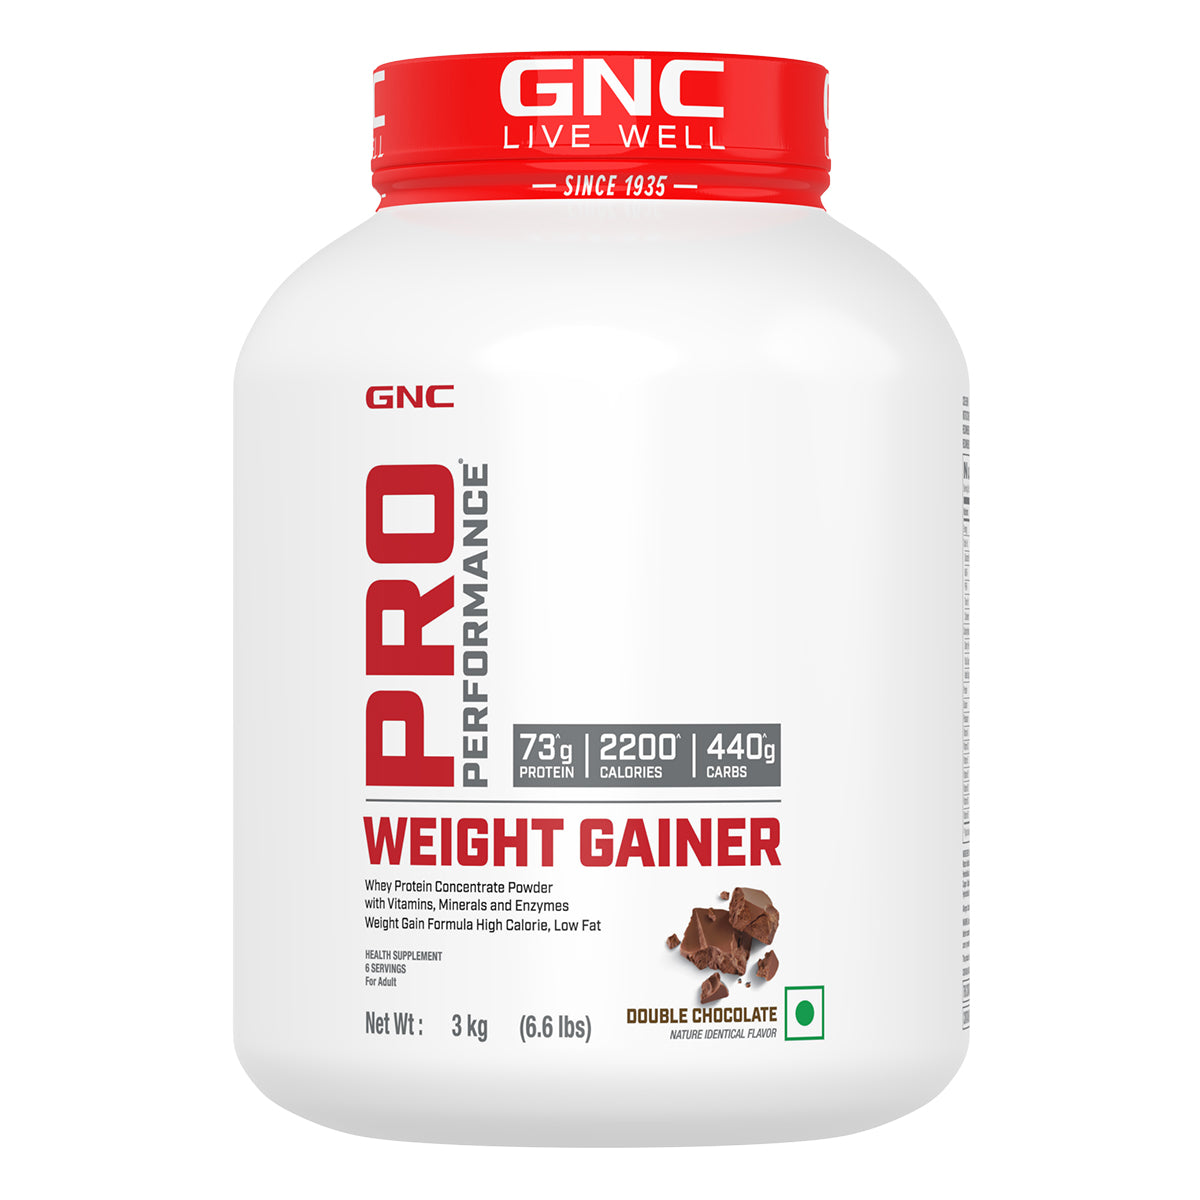 GNC Pro Performance Weight Gainer 3KG with Gym Kit - High-Calorie, Low-Fat Formula For Healthy Body Gains